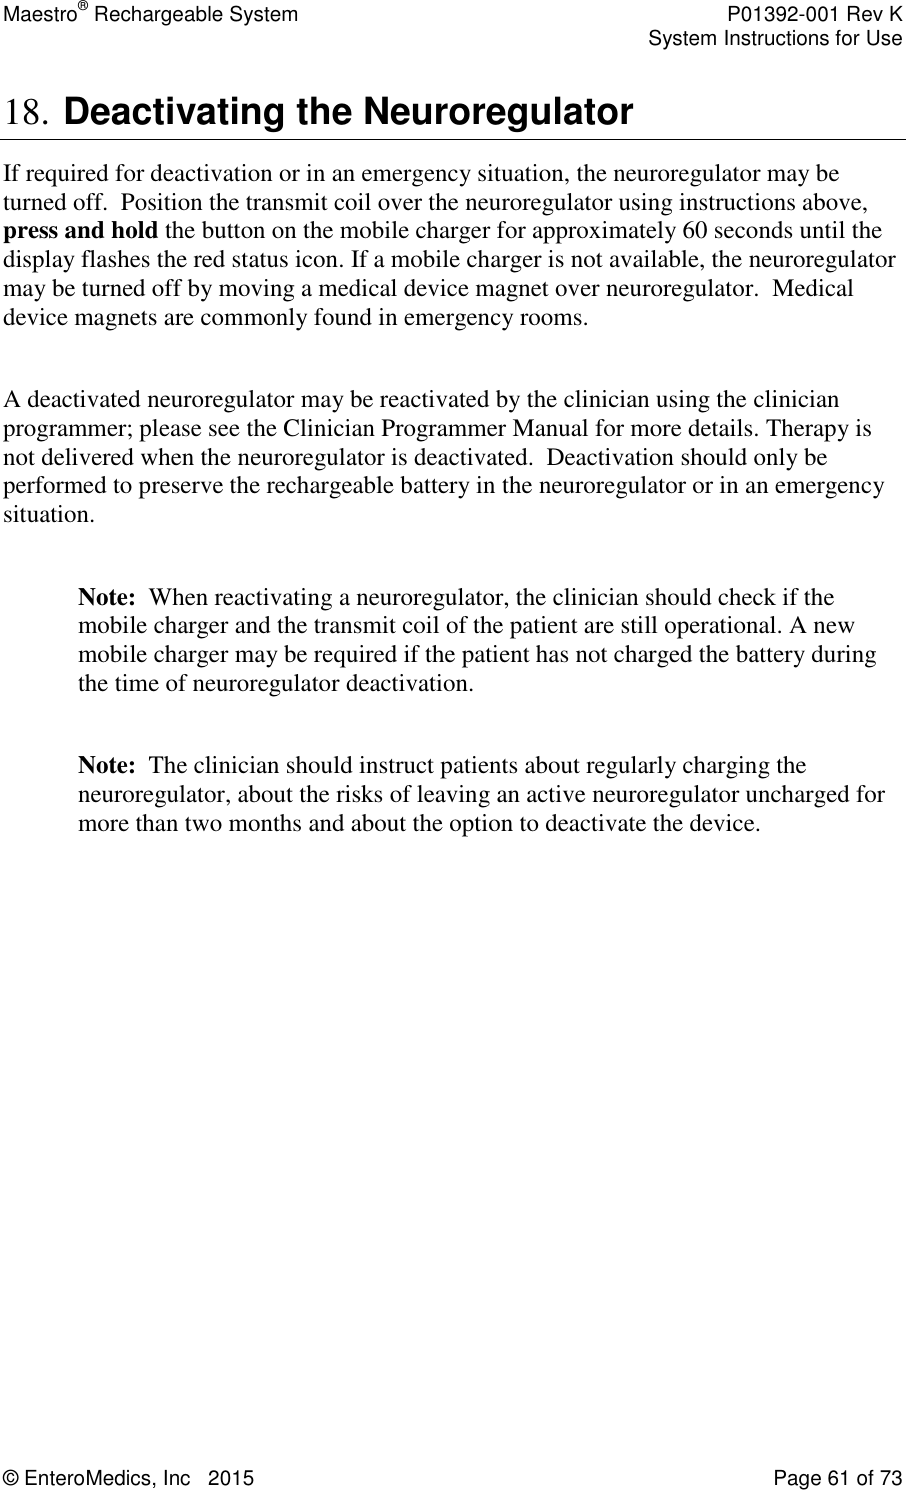 Maestro® Rechargeable System    P01392-001 Rev K     System Instructions for Use  © EnteroMedics, Inc   2015  Page 61 of 73  18. Deactivating the Neuroregulator  If required for deactivation or in an emergency situation, the neuroregulator may be turned off.  Position the transmit coil over the neuroregulator using instructions above,  press and hold the button on the mobile charger for approximately 60 seconds until the display flashes the red status icon. If a mobile charger is not available, the neuroregulator may be turned off by moving a medical device magnet over neuroregulator.  Medical device magnets are commonly found in emergency rooms.   A deactivated neuroregulator may be reactivated by the clinician using the clinician programmer; please see the Clinician Programmer Manual for more details. Therapy is not delivered when the neuroregulator is deactivated.  Deactivation should only be performed to preserve the rechargeable battery in the neuroregulator or in an emergency situation.  Note:  When reactivating a neuroregulator, the clinician should check if the mobile charger and the transmit coil of the patient are still operational. A new mobile charger may be required if the patient has not charged the battery during the time of neuroregulator deactivation.  Note:  The clinician should instruct patients about regularly charging the neuroregulator, about the risks of leaving an active neuroregulator uncharged for more than two months and about the option to deactivate the device.   